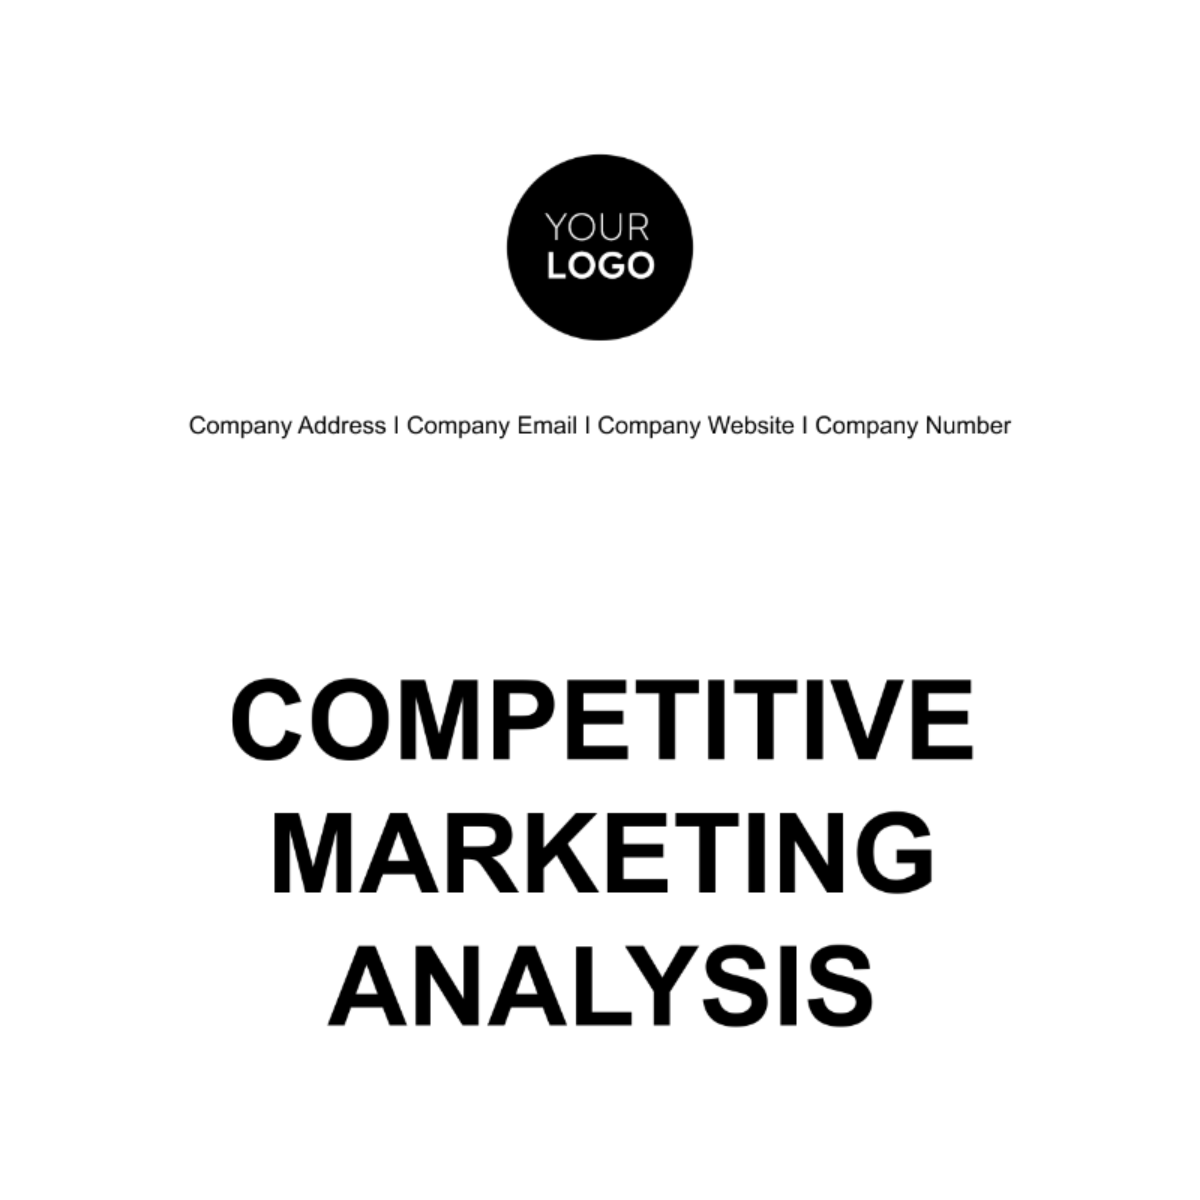 Competitive Marketing Analysis Template